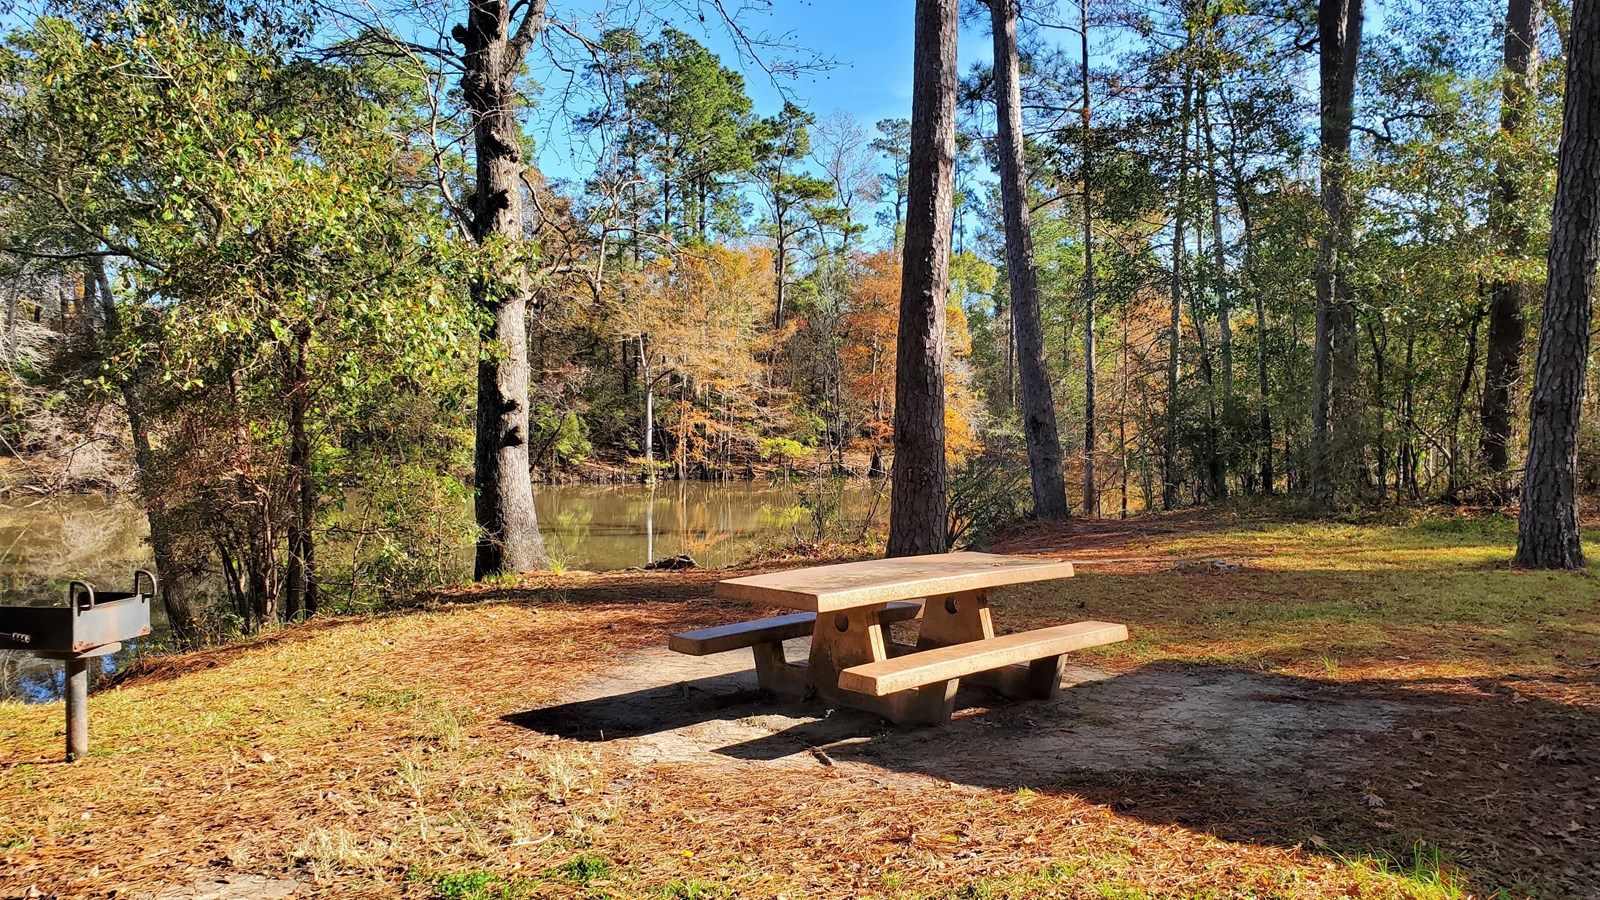 Picnic table and metal grill in a forested area along a waterway